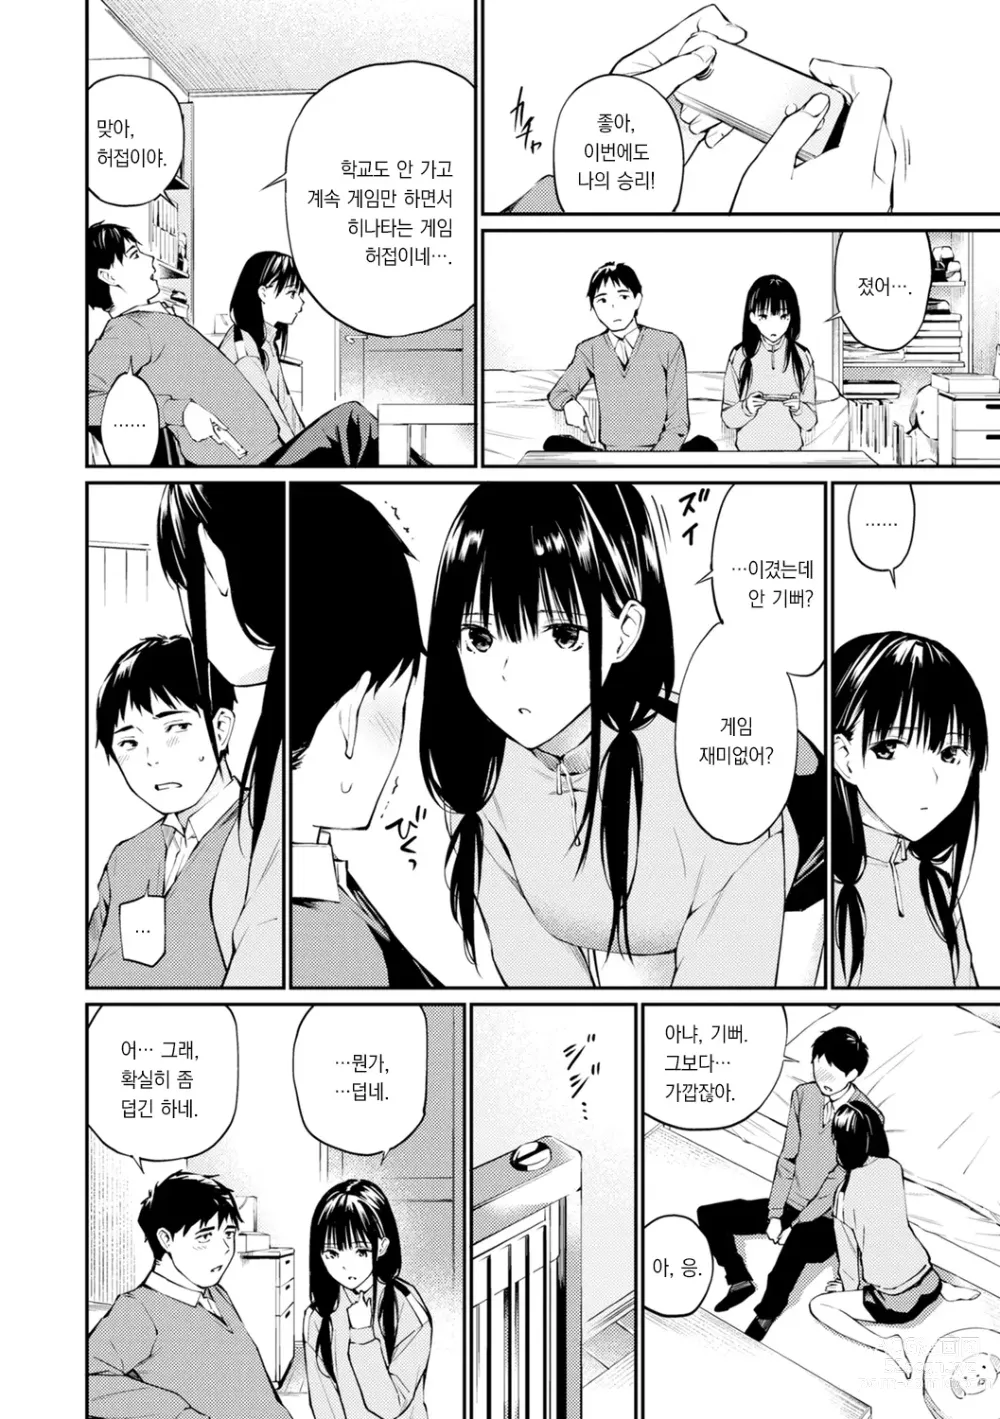 Page 146 of manga 비밀이에요. - Between You&ME